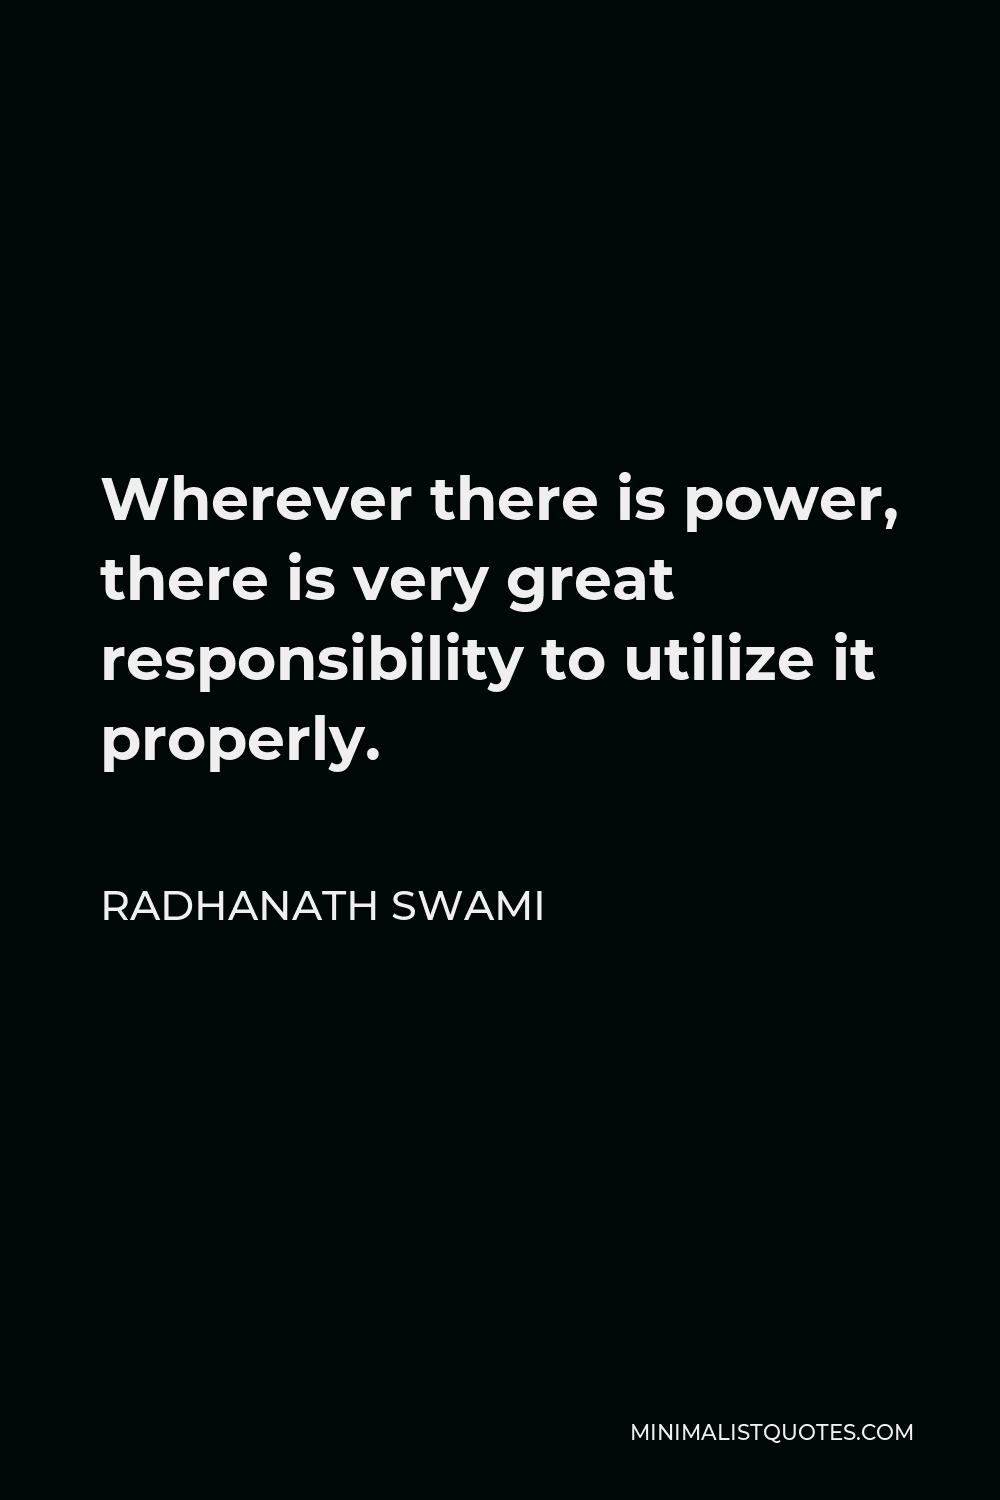 Radhanath Swami Quote - Wherever there is power, there is very great responsibility to utilize it properly.